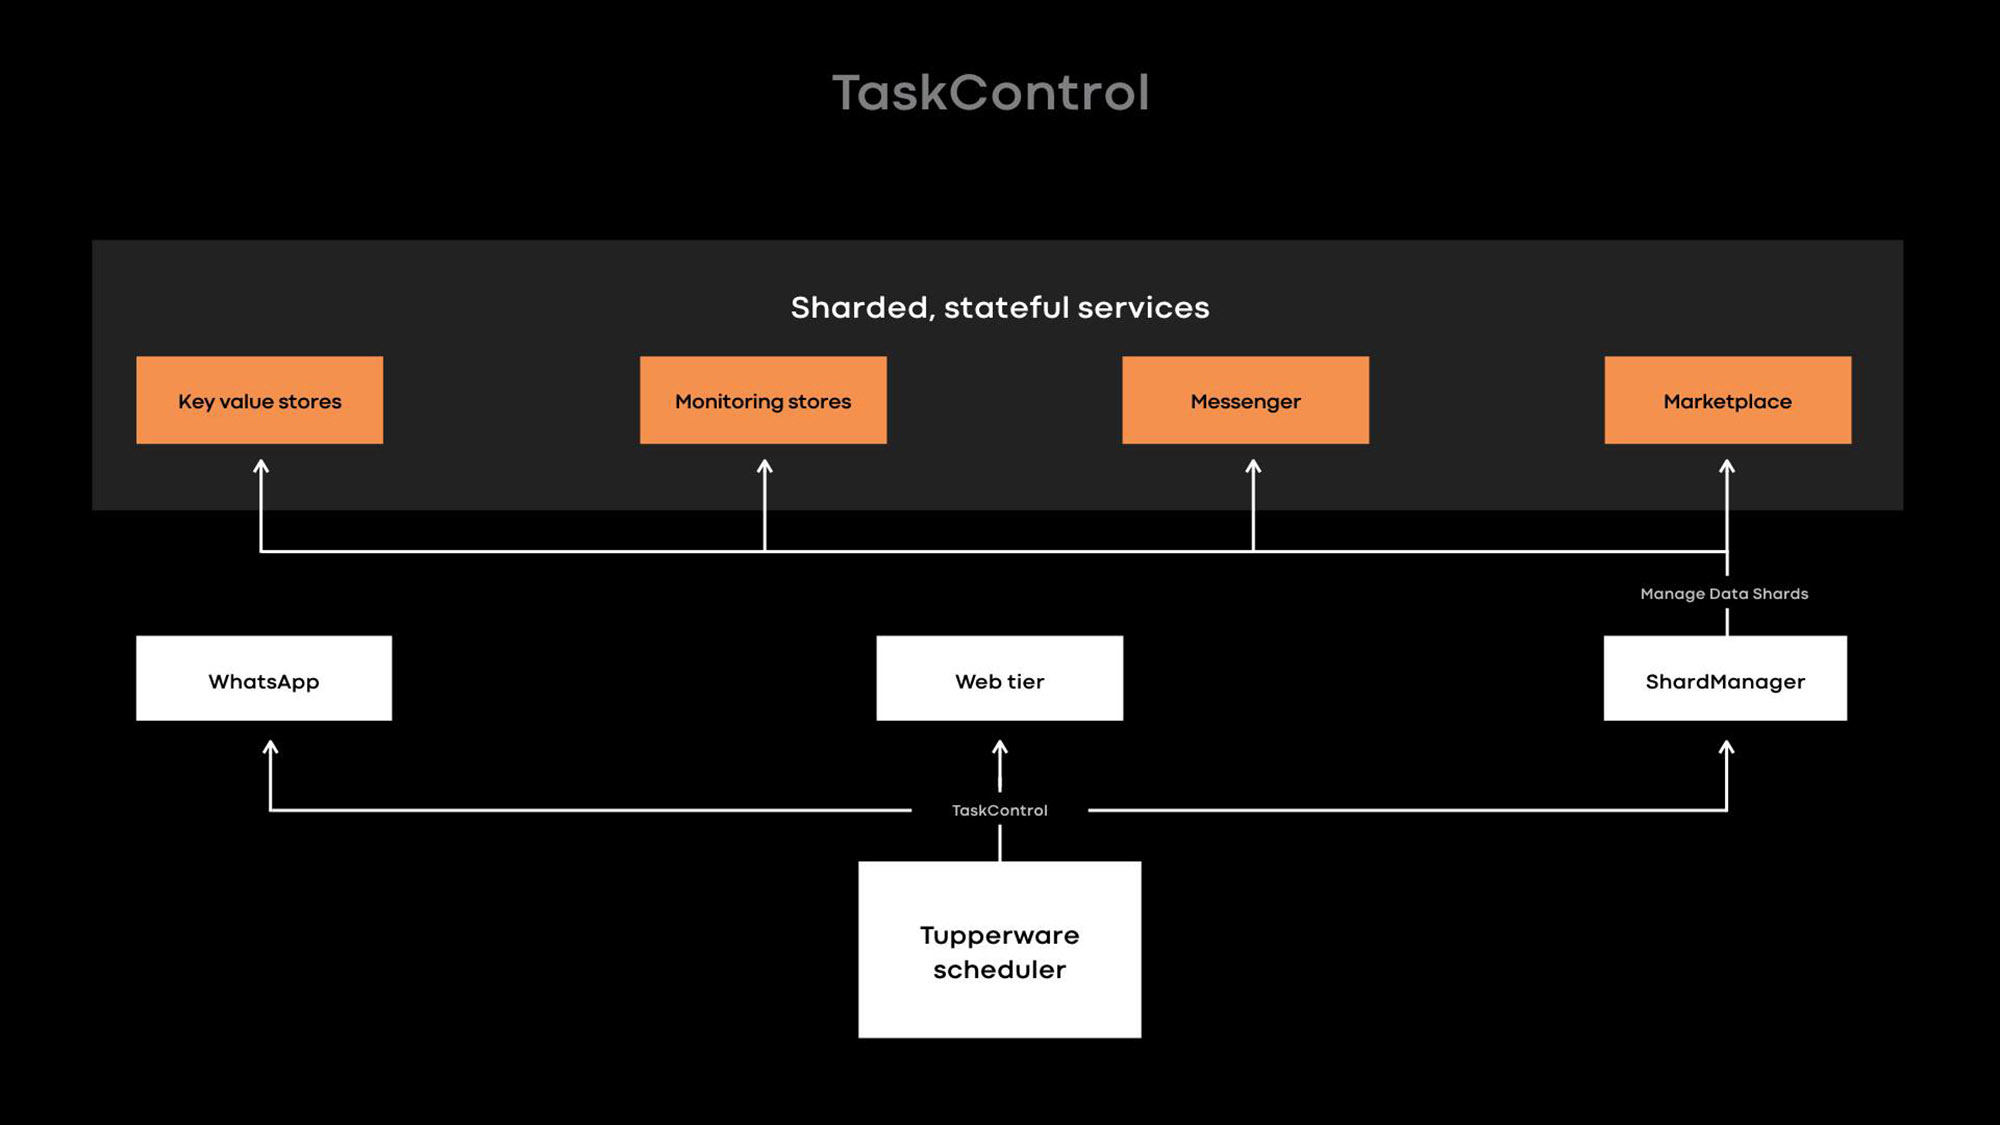 Twine cluster management: An interface called TaskControl allows stateful services to weigh in on decisions that may affect data availability.